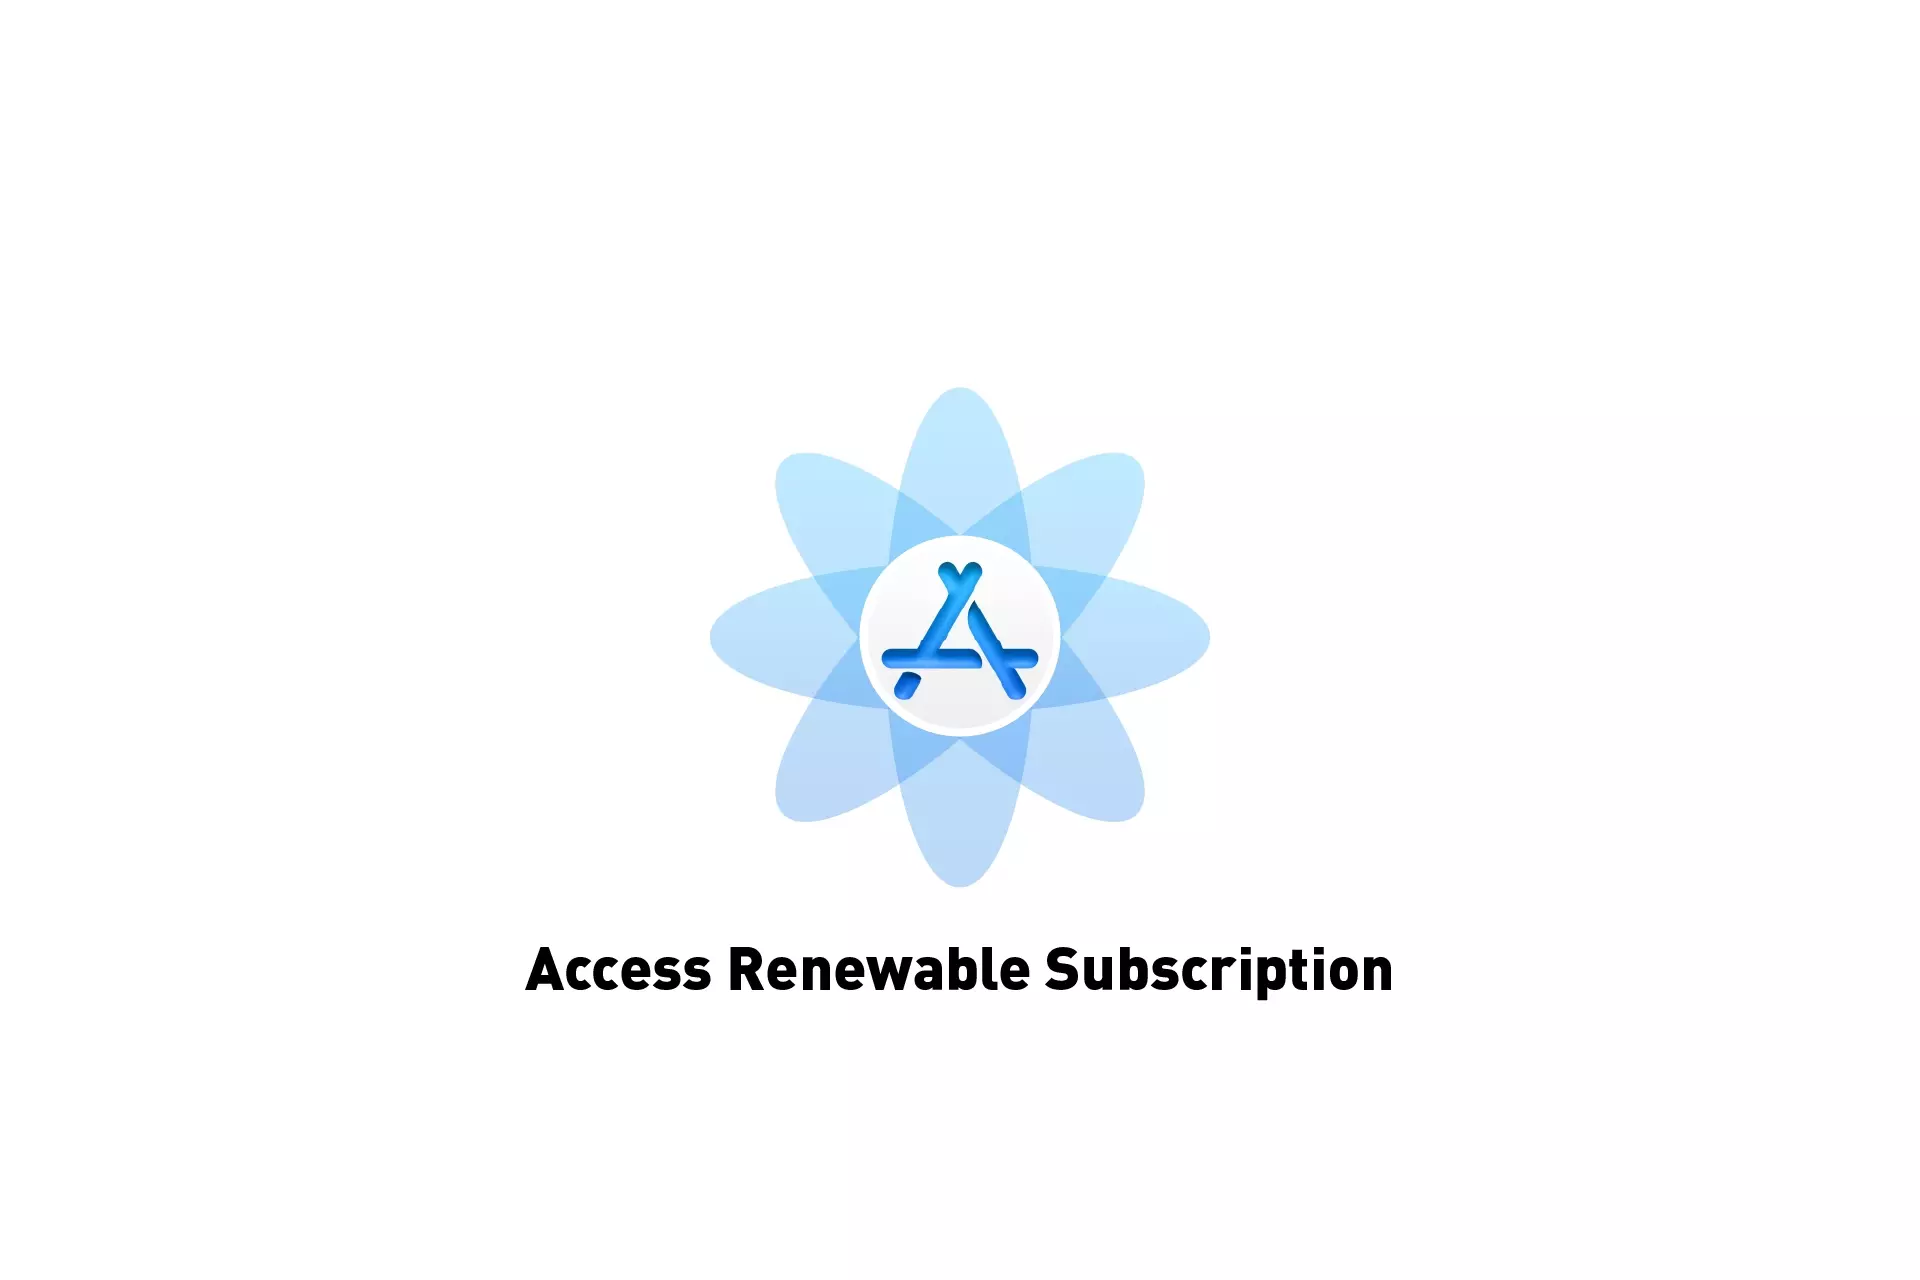 A flower that represents App Store Connect with the text "Access Renewable Subscription" beneath it.